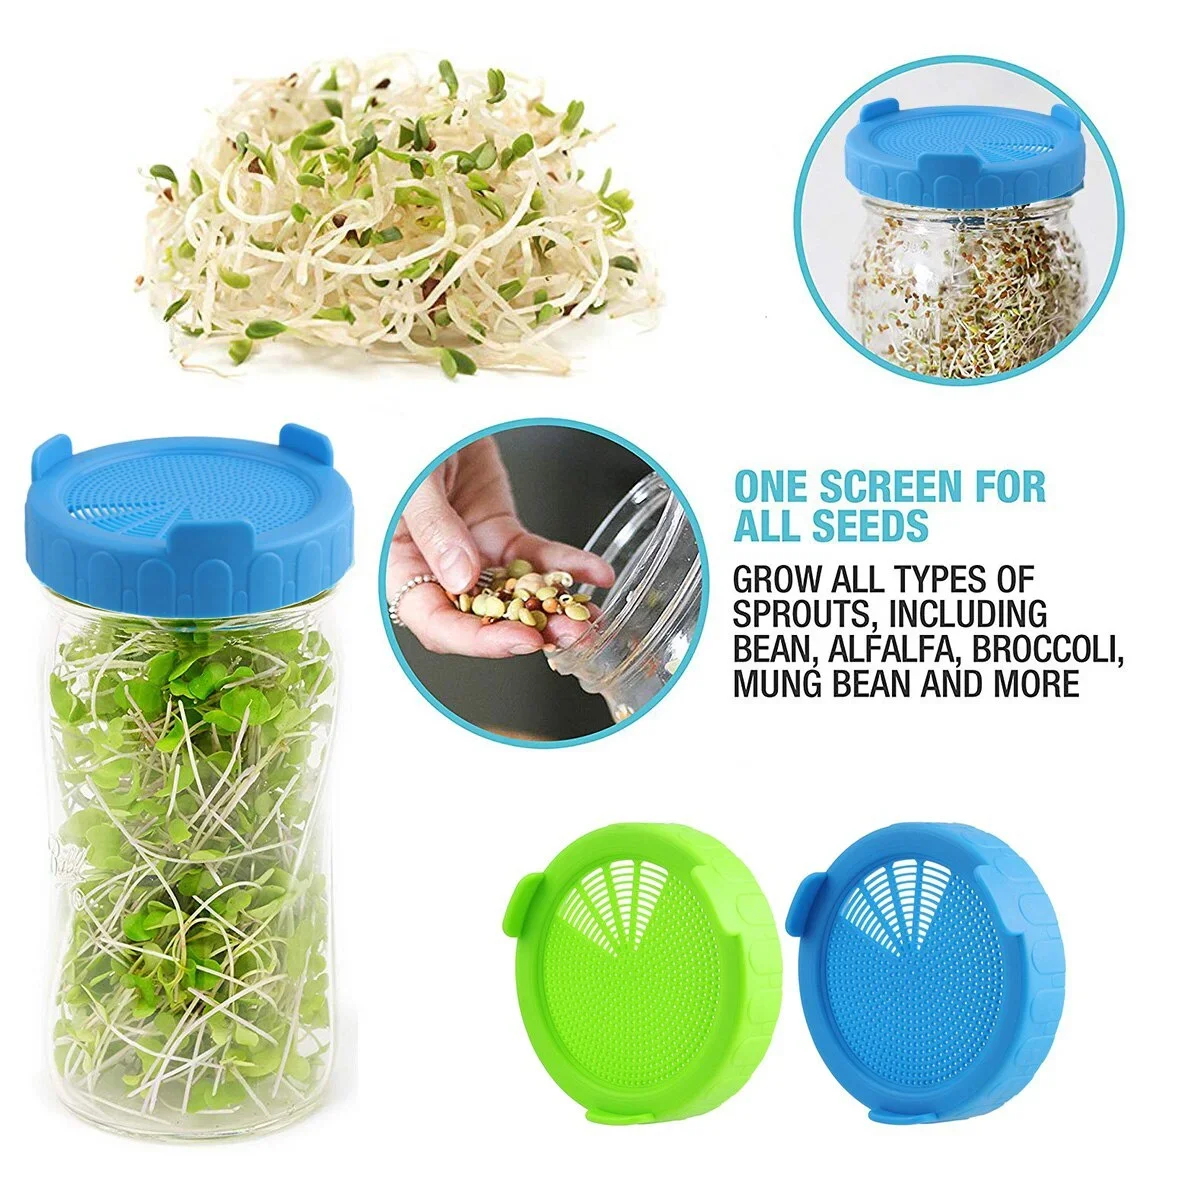 

2pcs Wide Mouth Jar Plastic Screen Sprouting Strainer Lid Kit for Growing Bean Broccoli Alfalfa Salad Sprouts More Lids